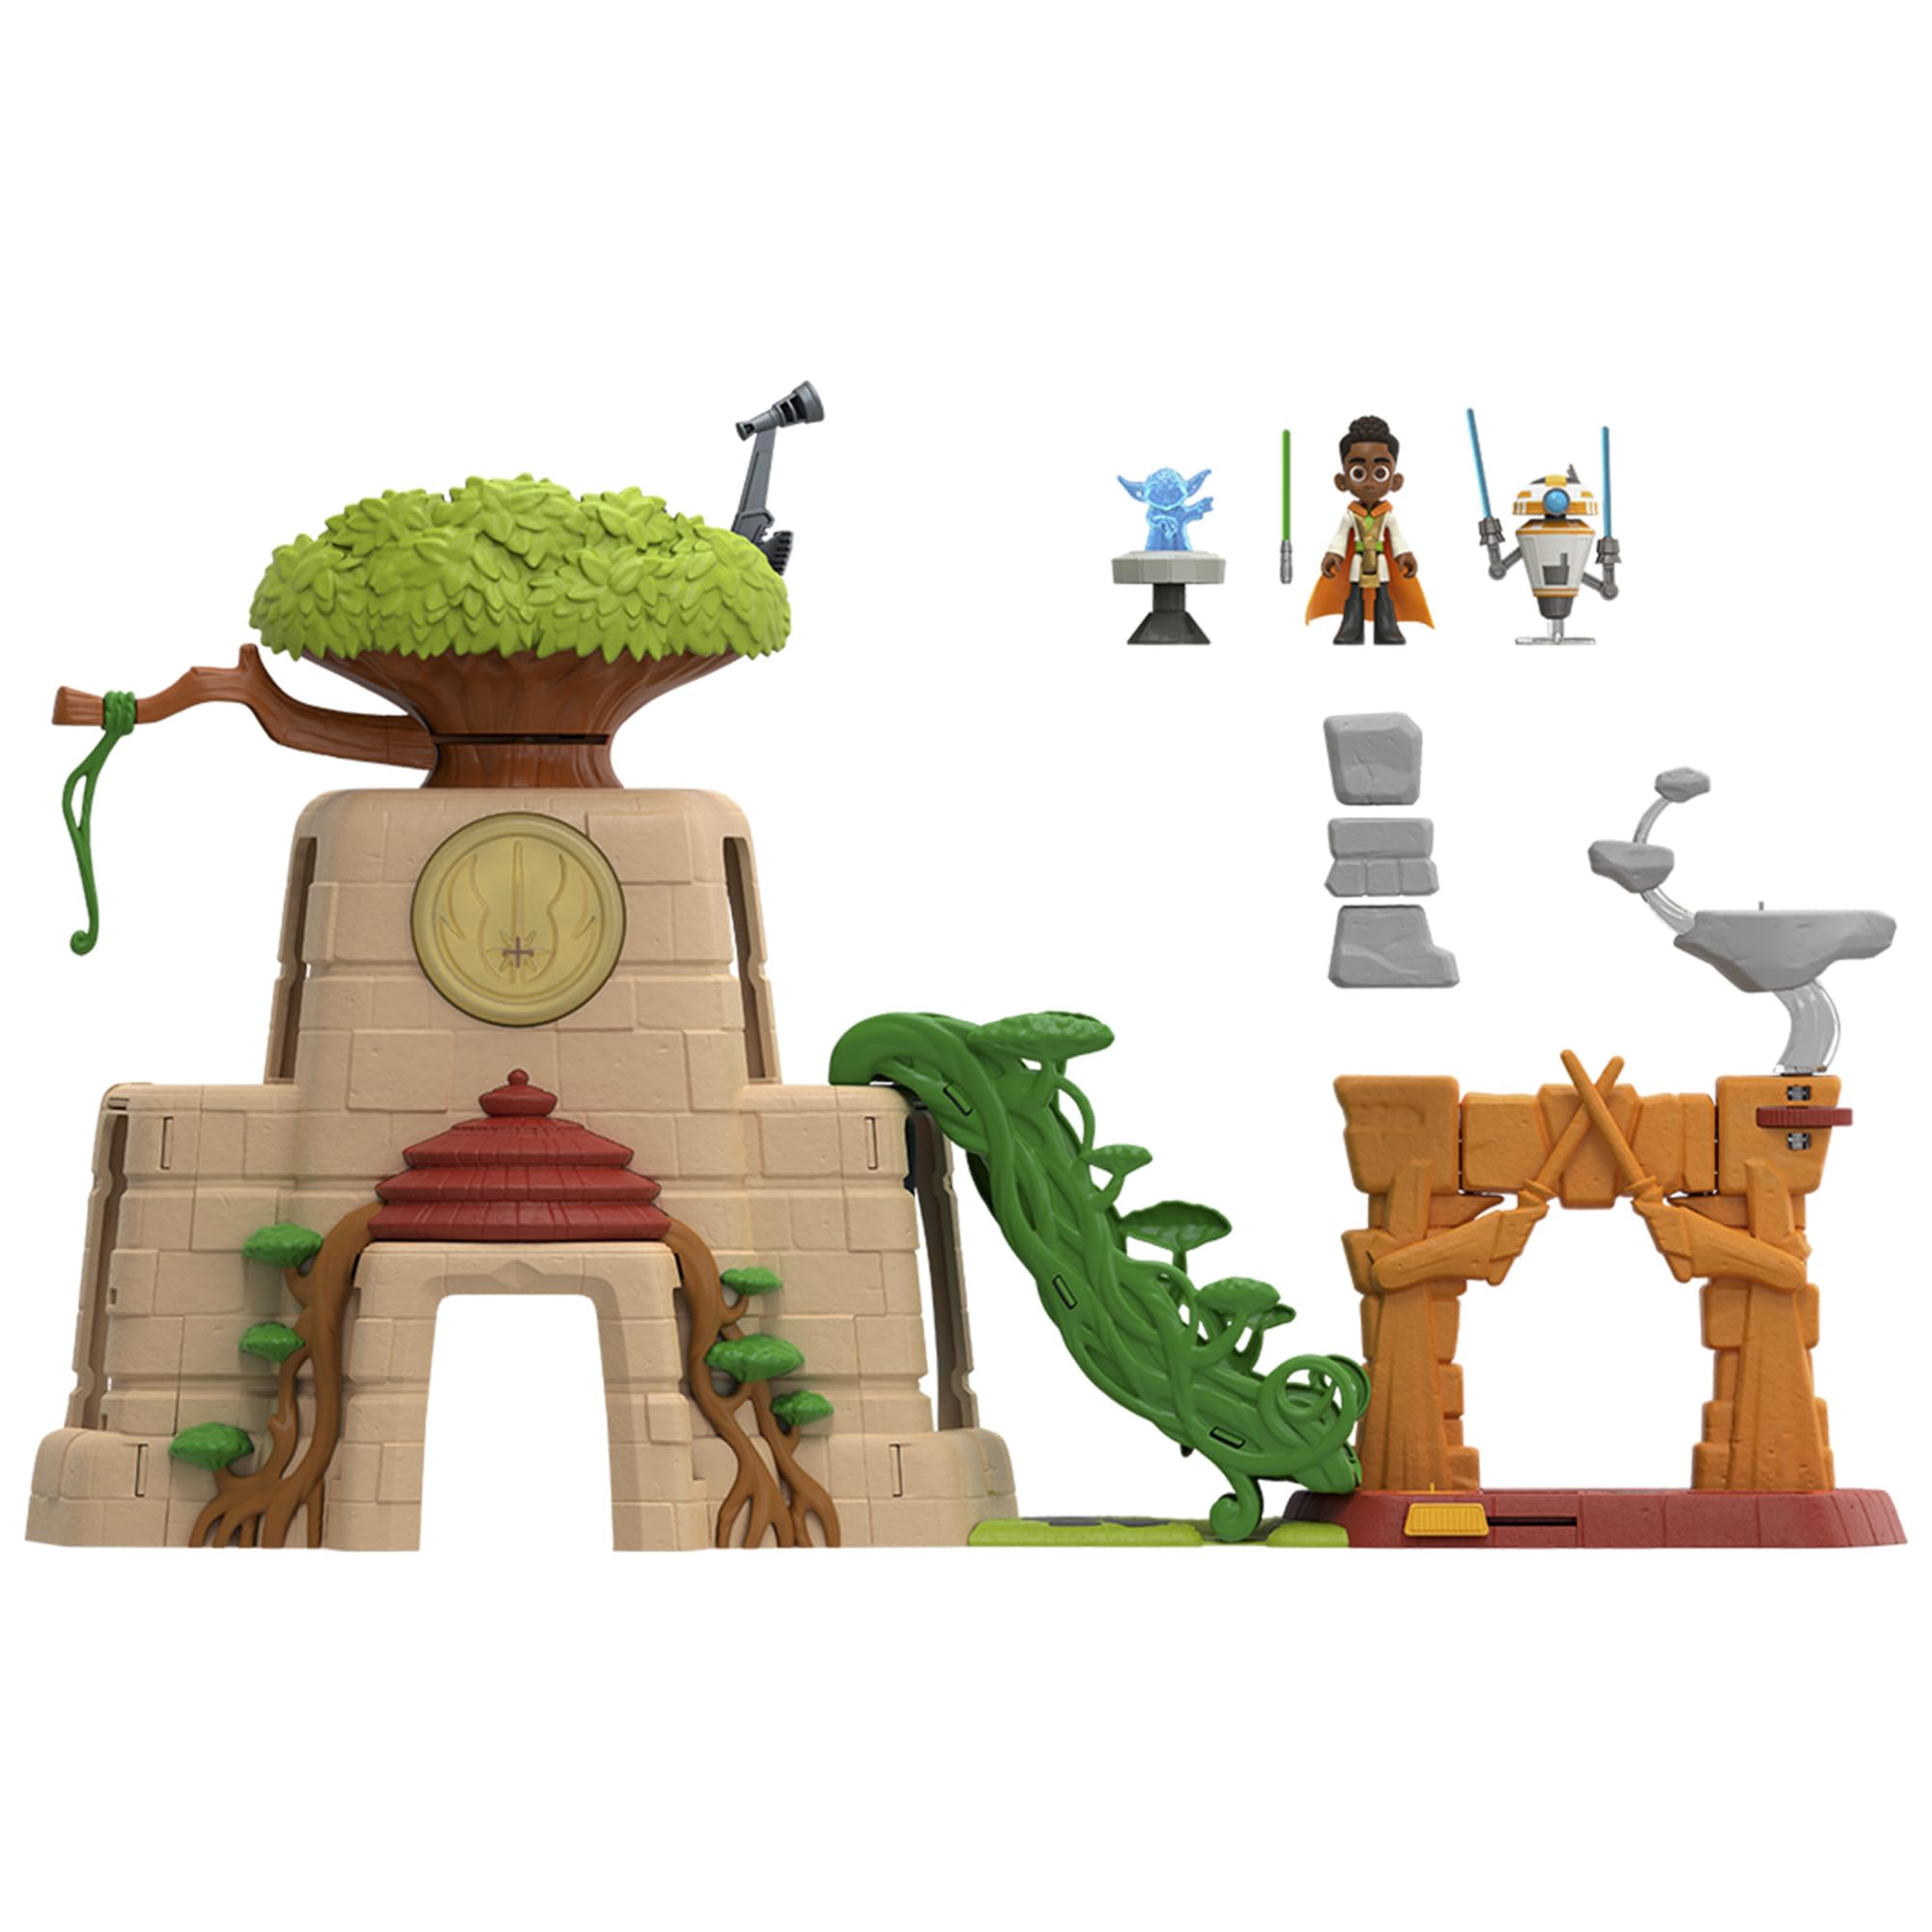 20" Star Wars Young Jedi Adventures Tenoo Jedi Temple Playset $45 + Free Shipping